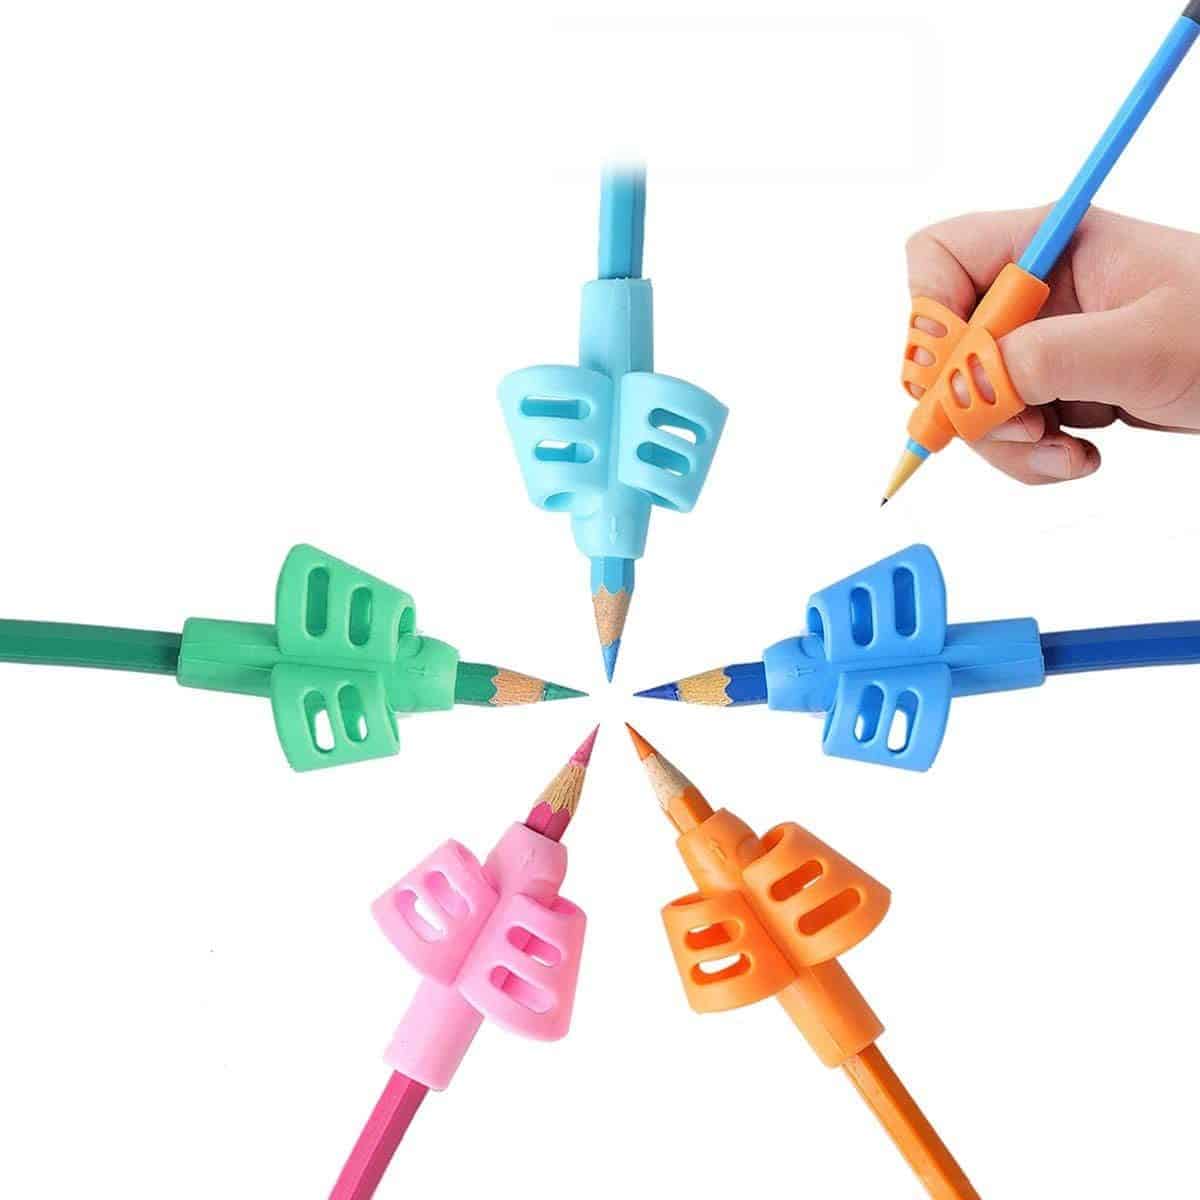 Help kids pencil grasp and handwriting with the 7 best pencil grips that are perfect for school and home. Learn which pencil grip is the best one for your kid! 